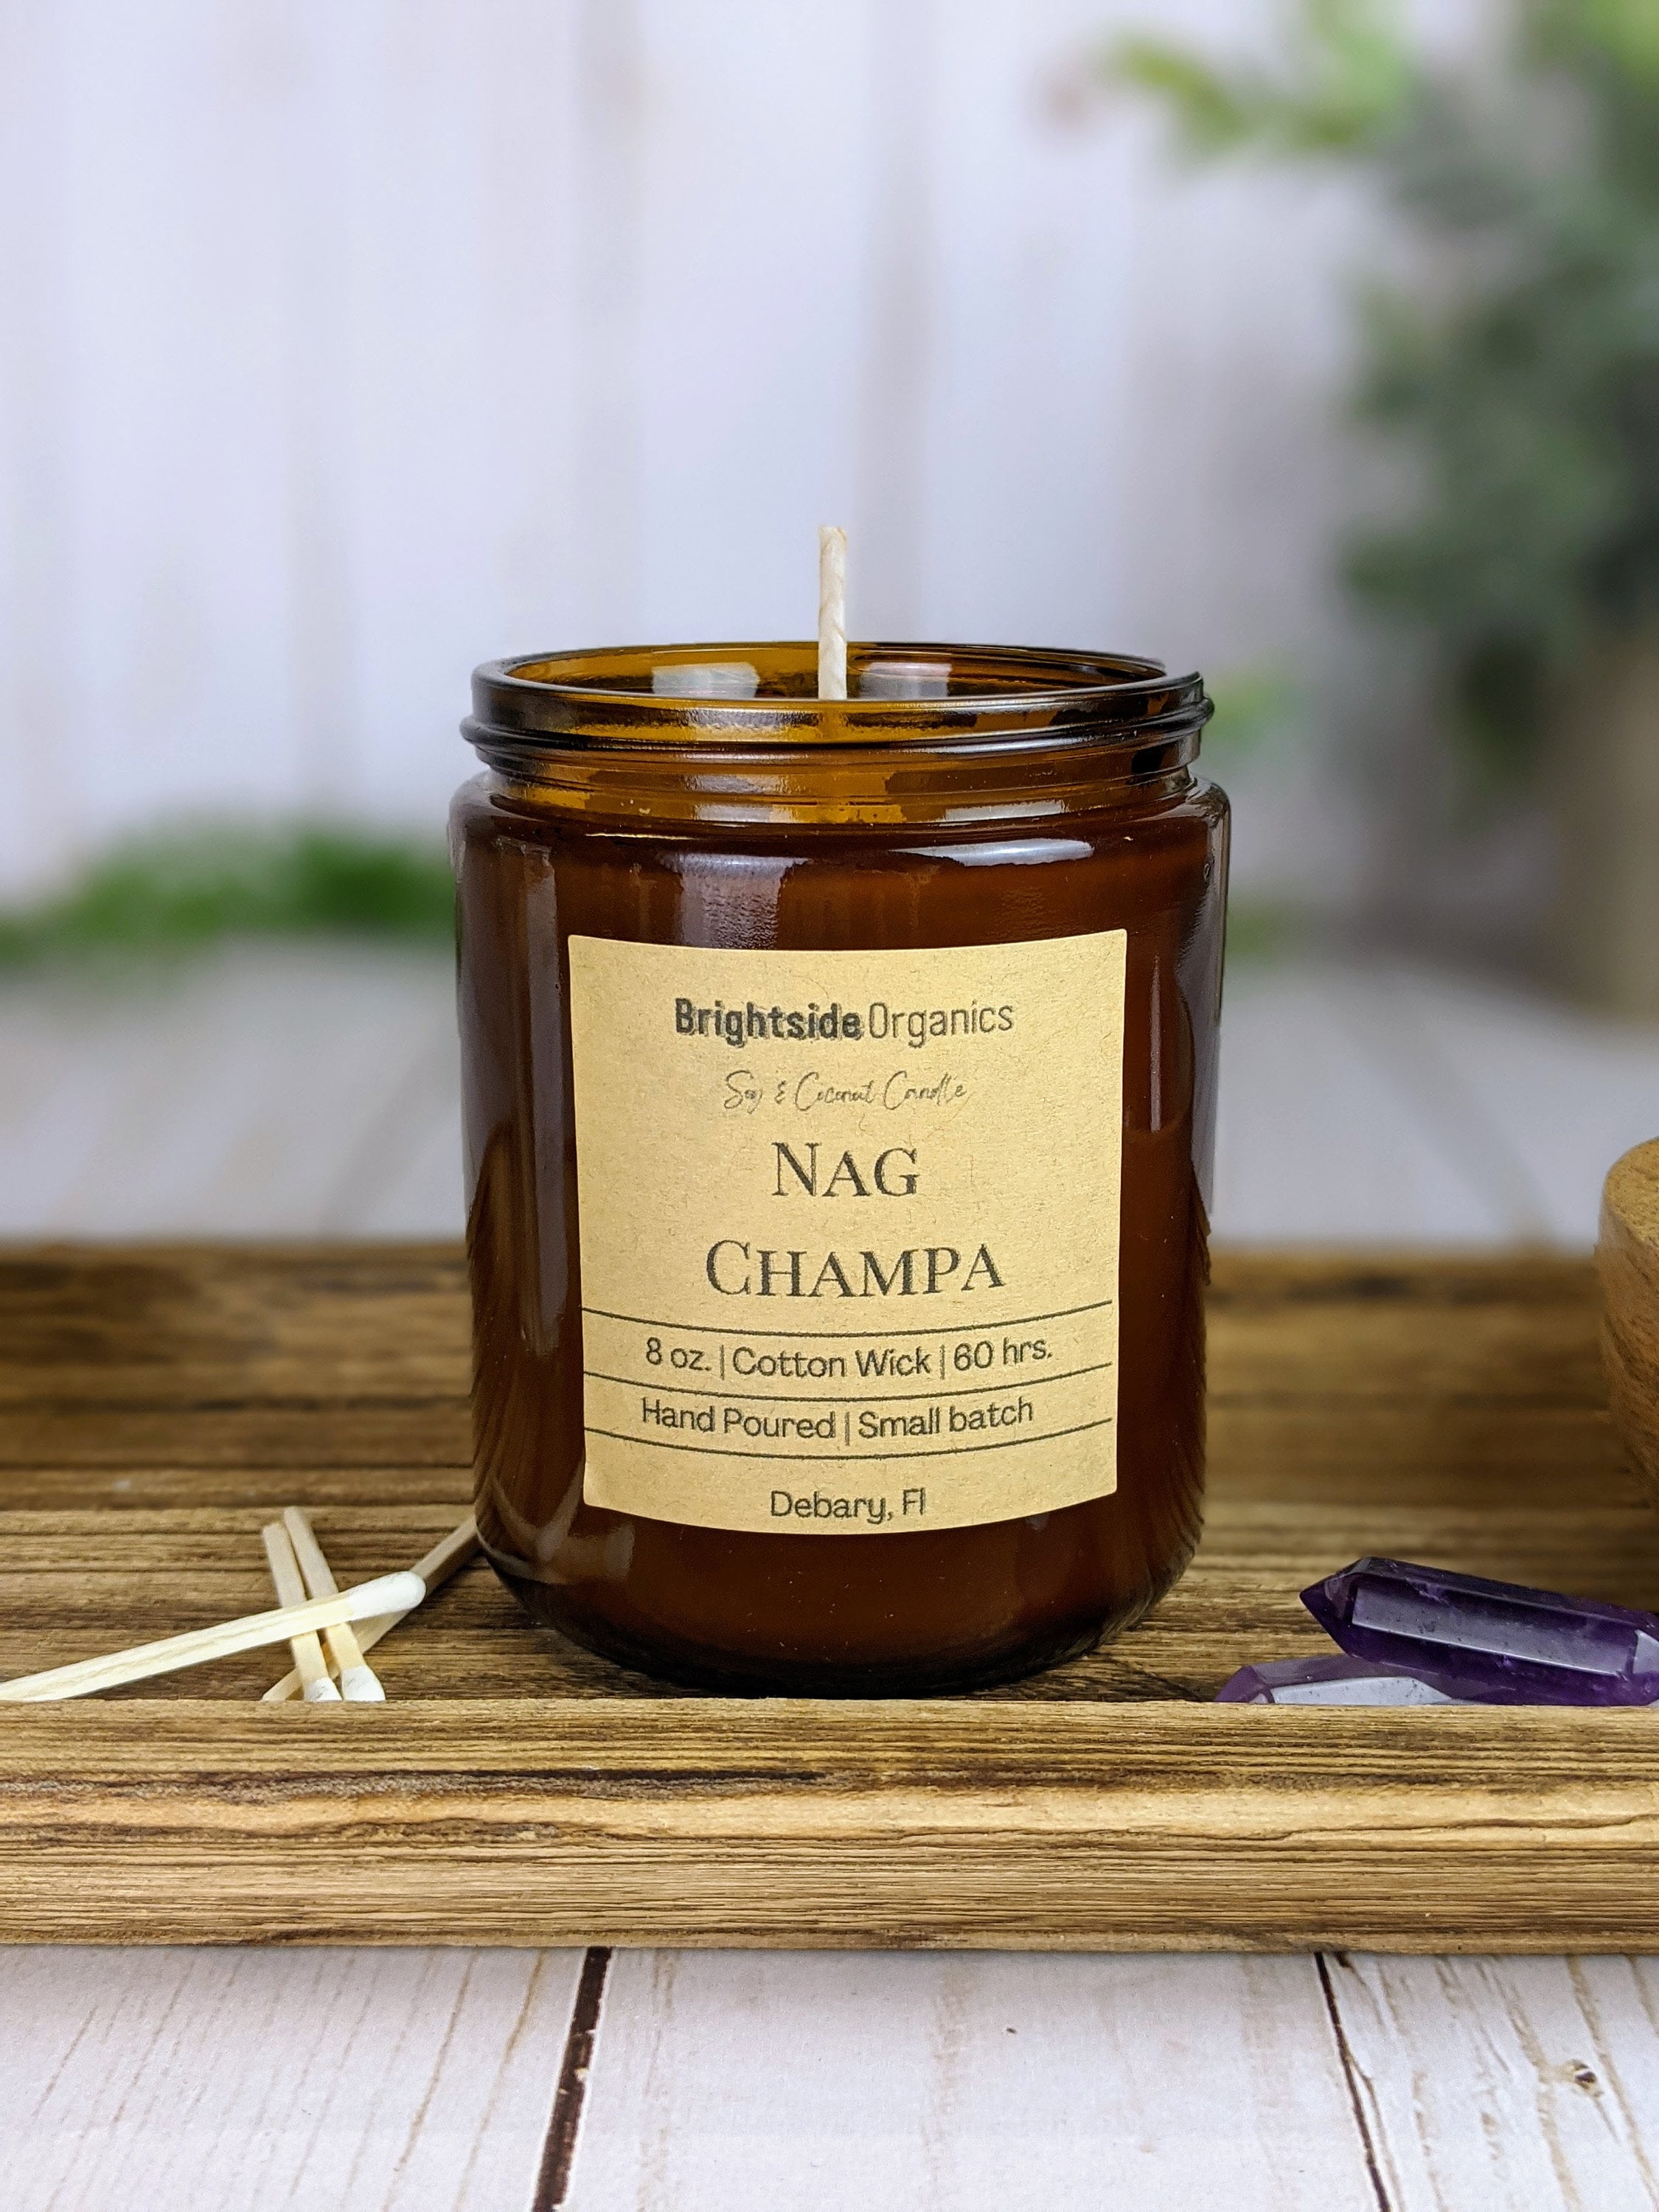 Nag Champa 8oz Coconut Soy Wax Candle Patchouli Vanilla Rose Scented Candle  Indian Incense Candle Gift for Her / Him 